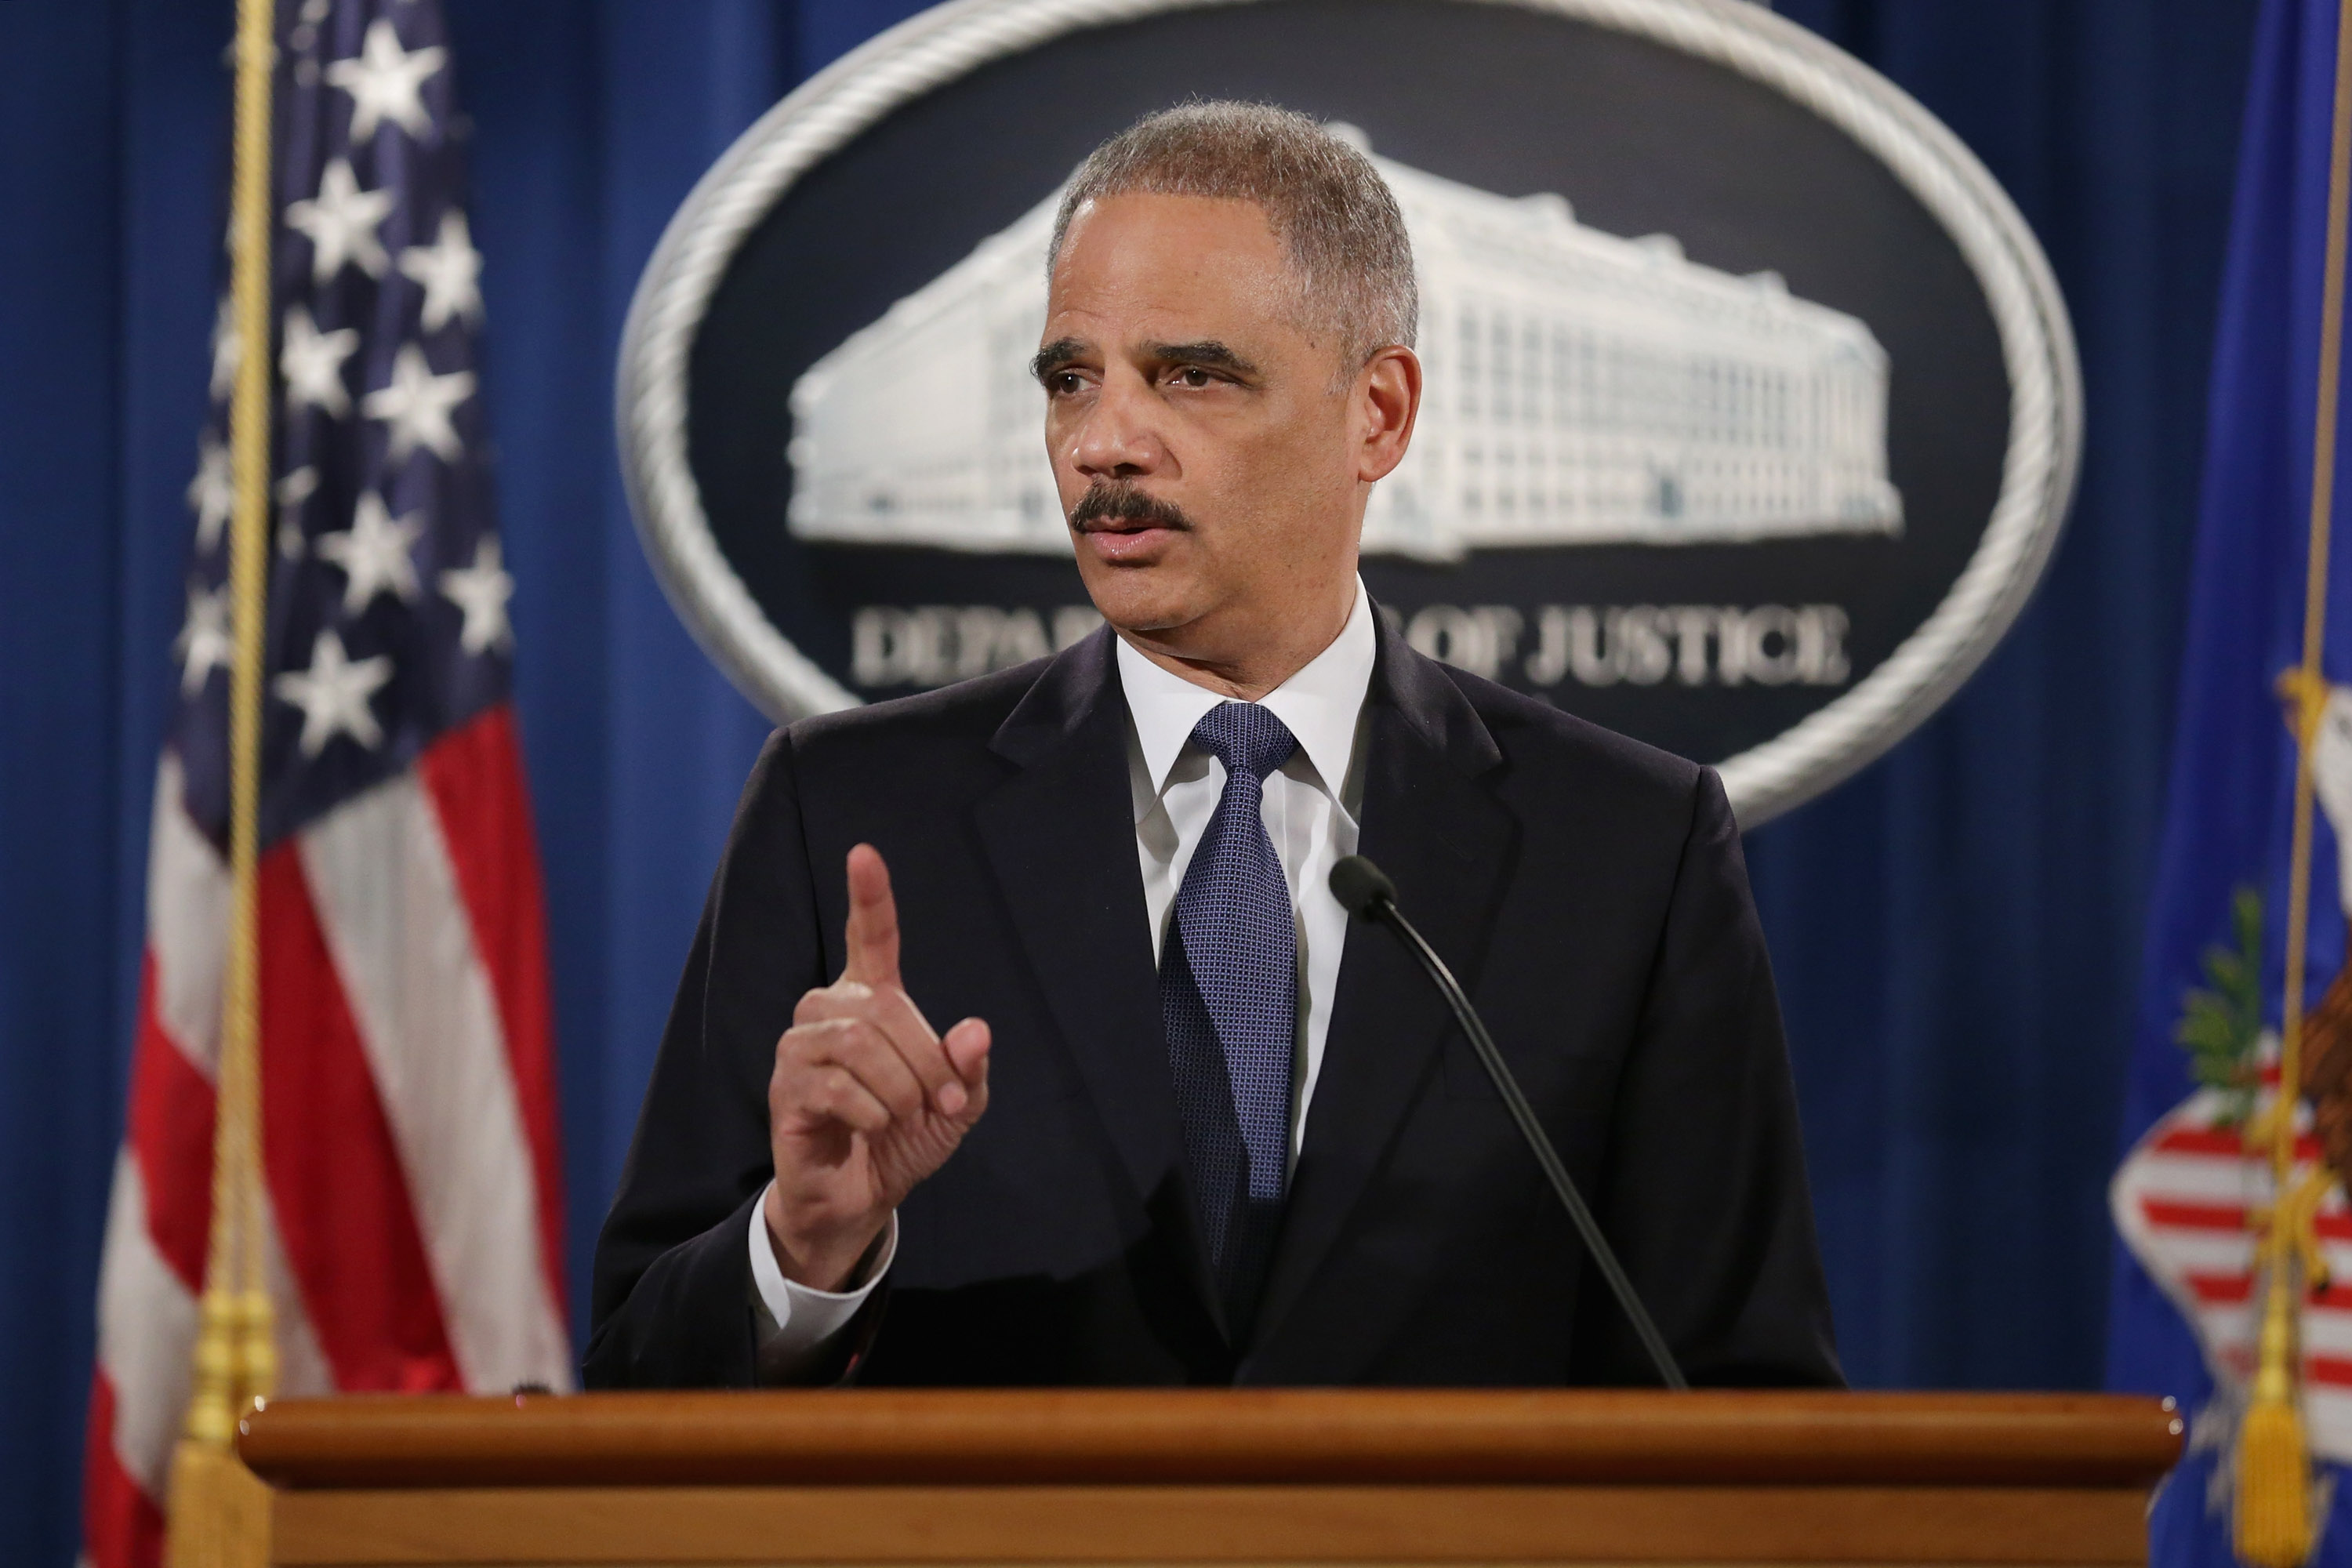 Attorney General Eric Holder delivers remarks about the Justice Department's findings related to two investigations in Ferguson, Missouri, at the Robert F. Kennedy Department of Justice Building March 4, 2015 in Washington, DC. (Chip Somodevilla—2015 Getty Images)